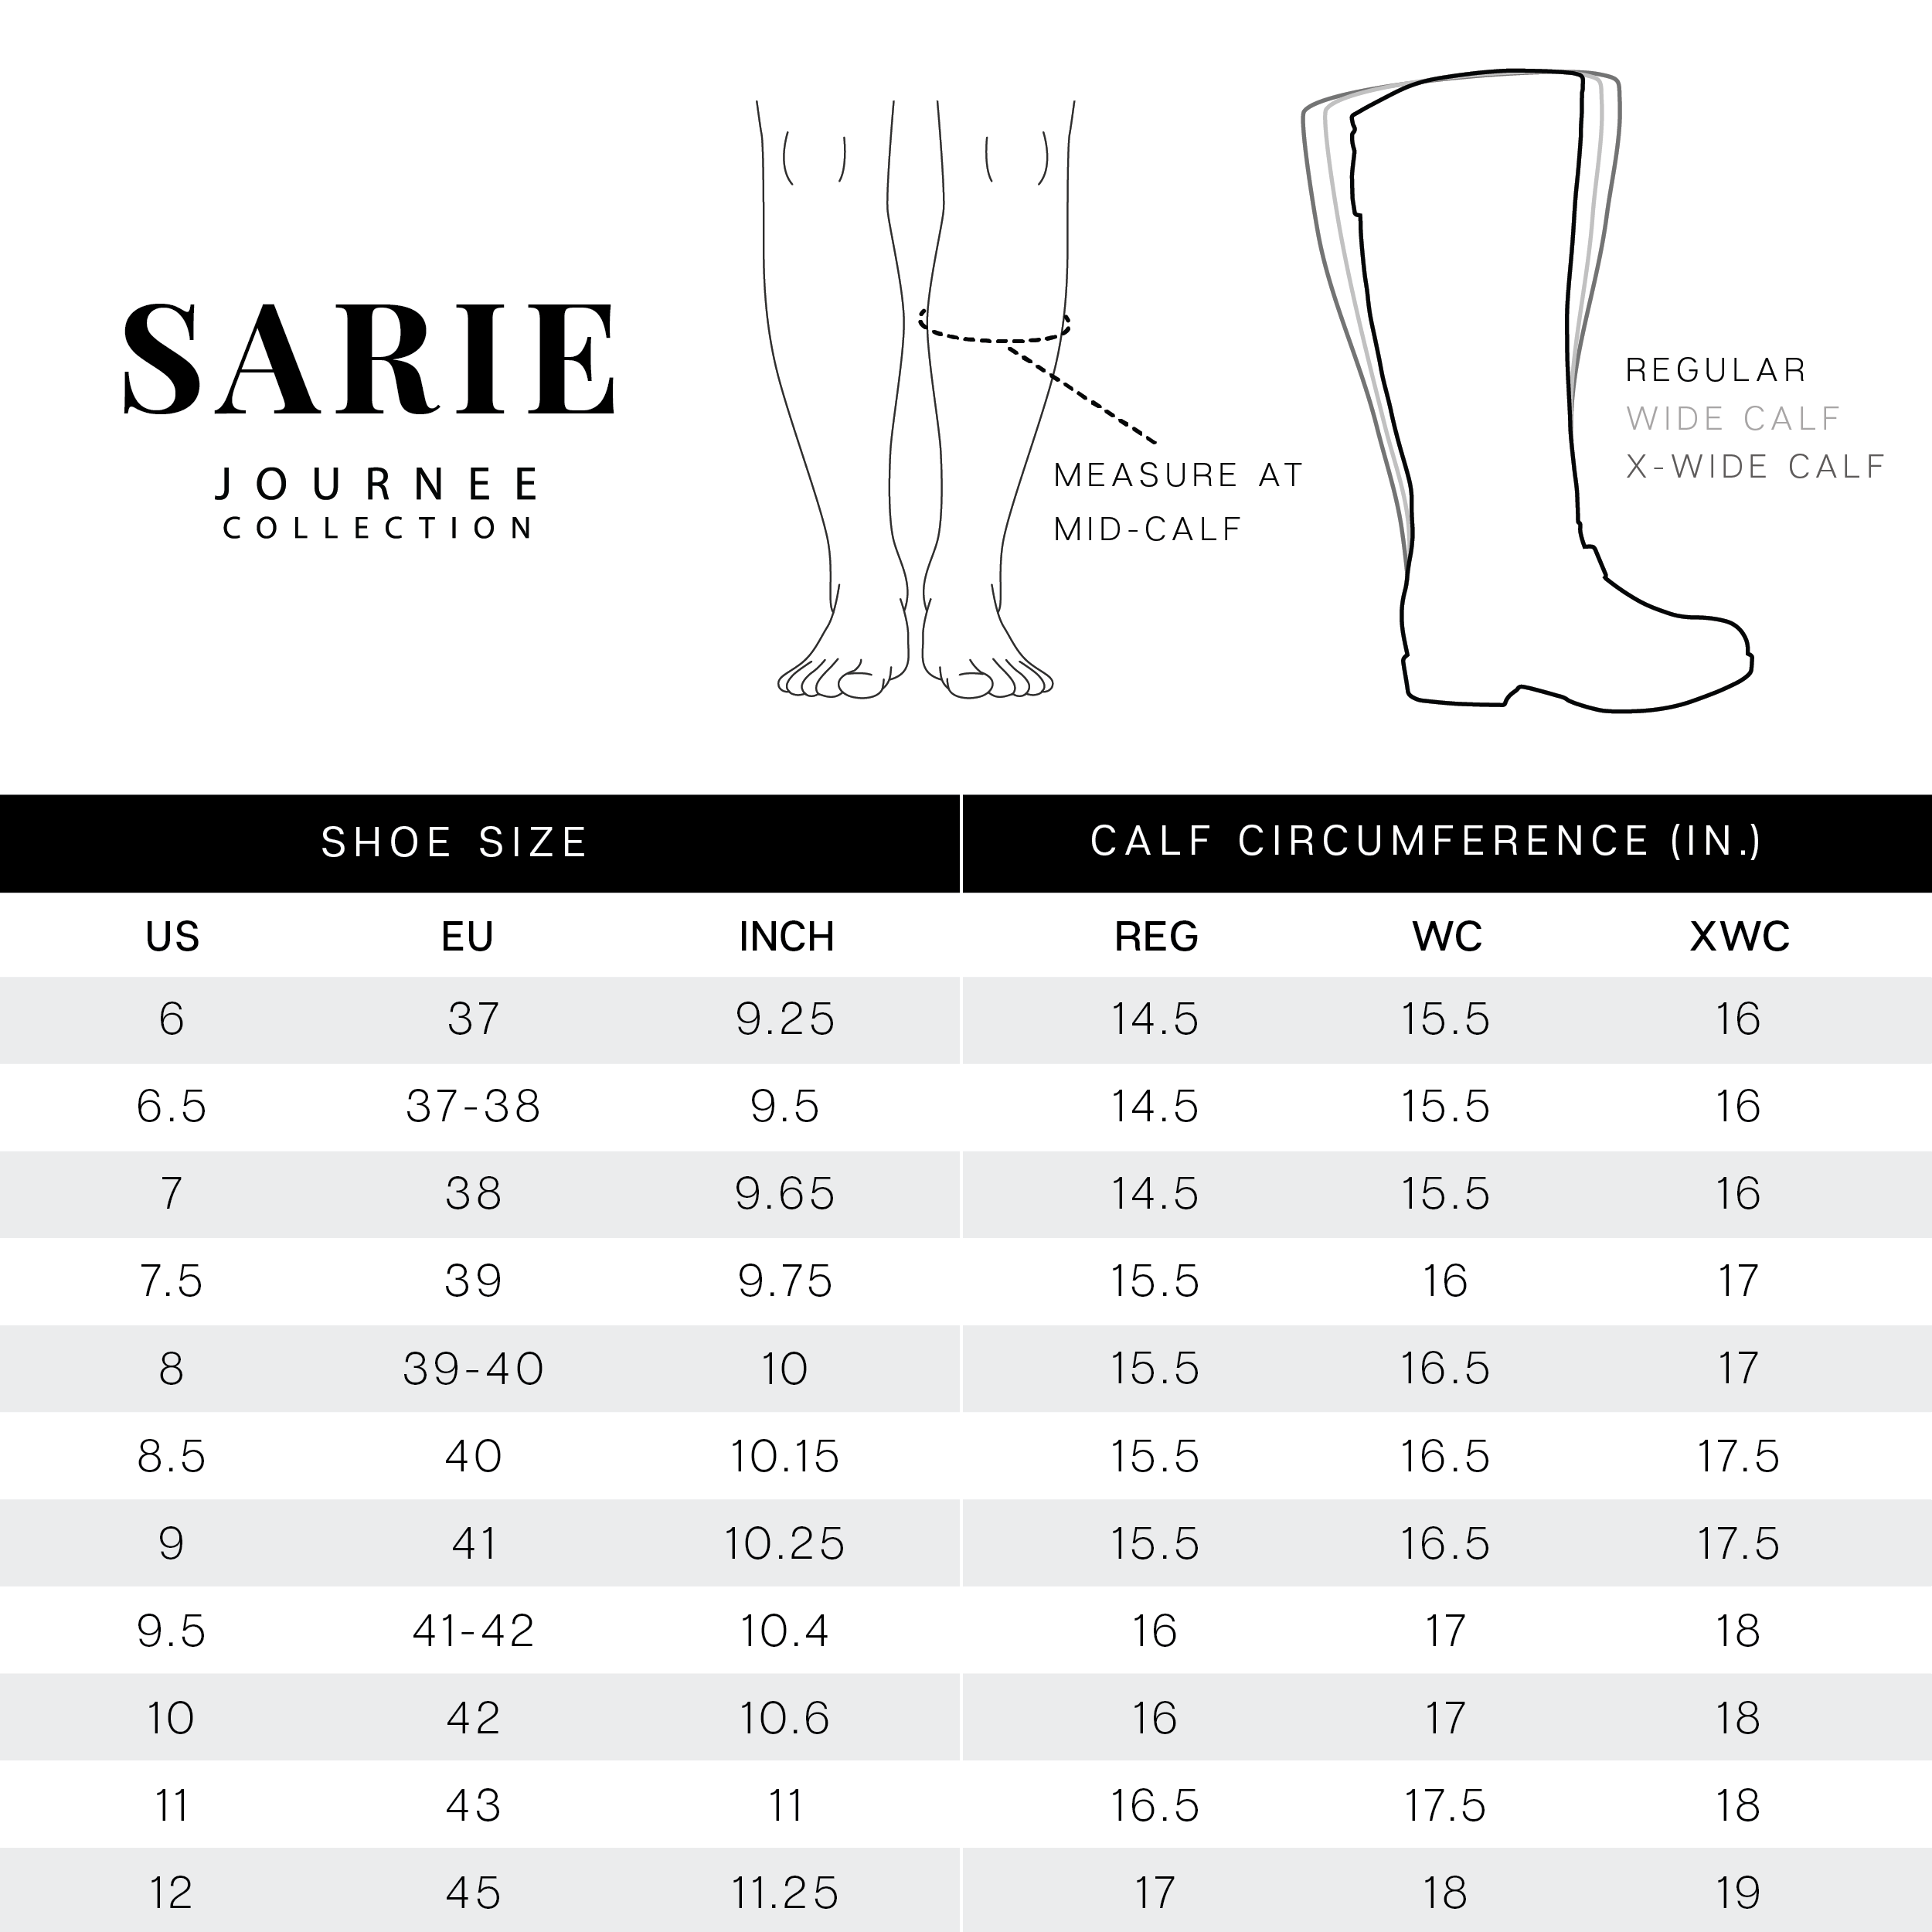 SARIE EXTRA WIDE CALF - Journee Collection